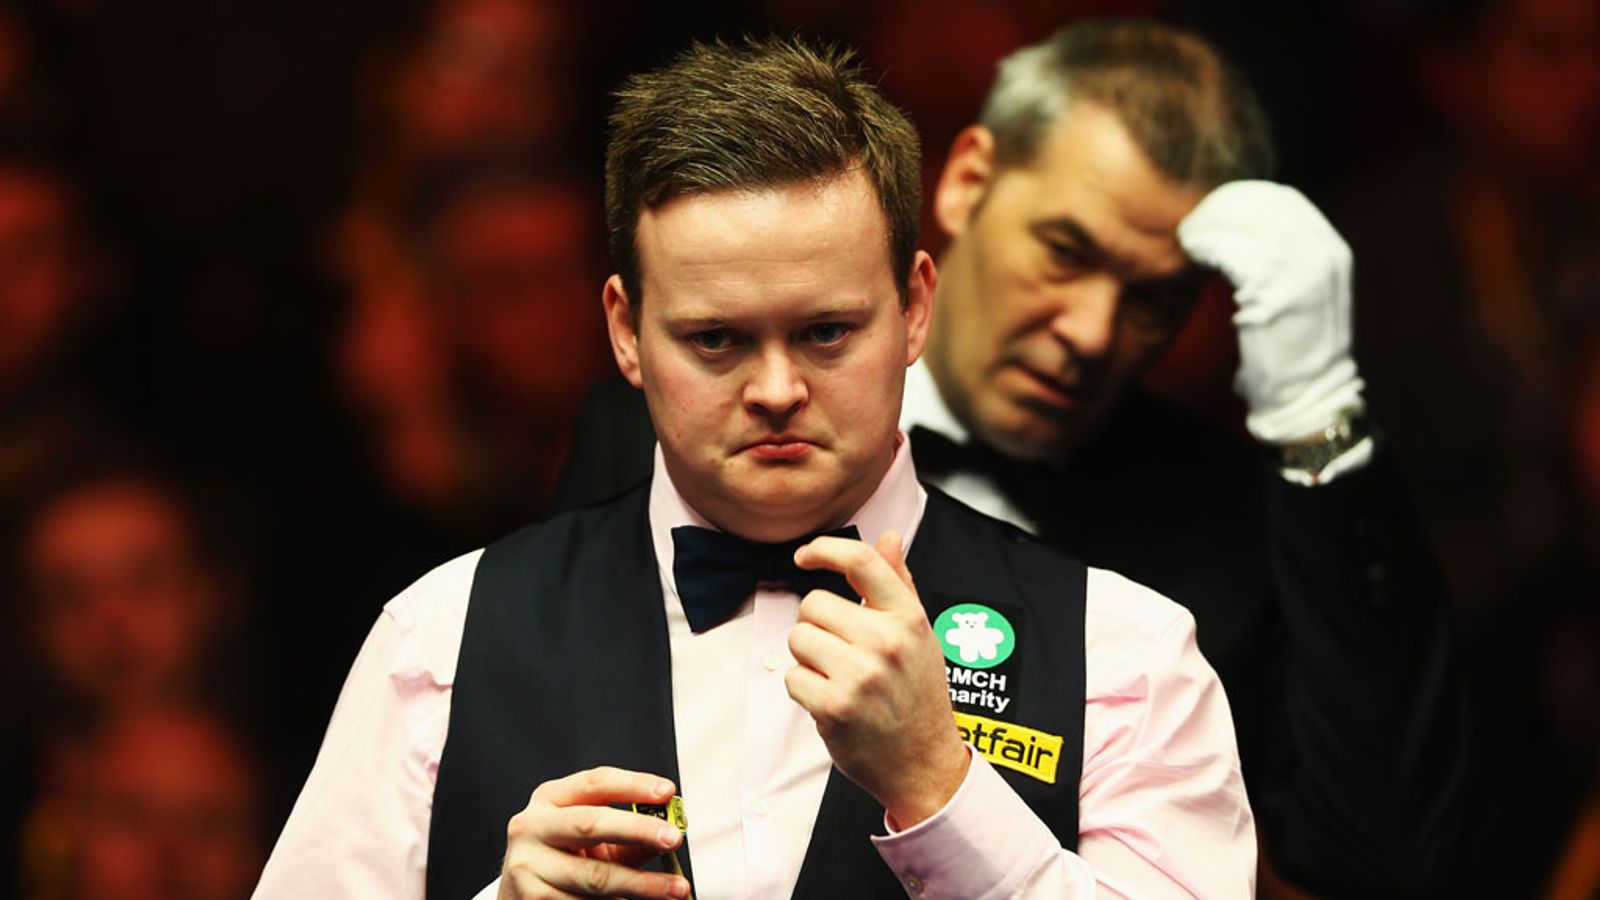 Welsh Open snooker Shaun Murphy rejects rumours of losing on purpose Snooker News Sky Sports